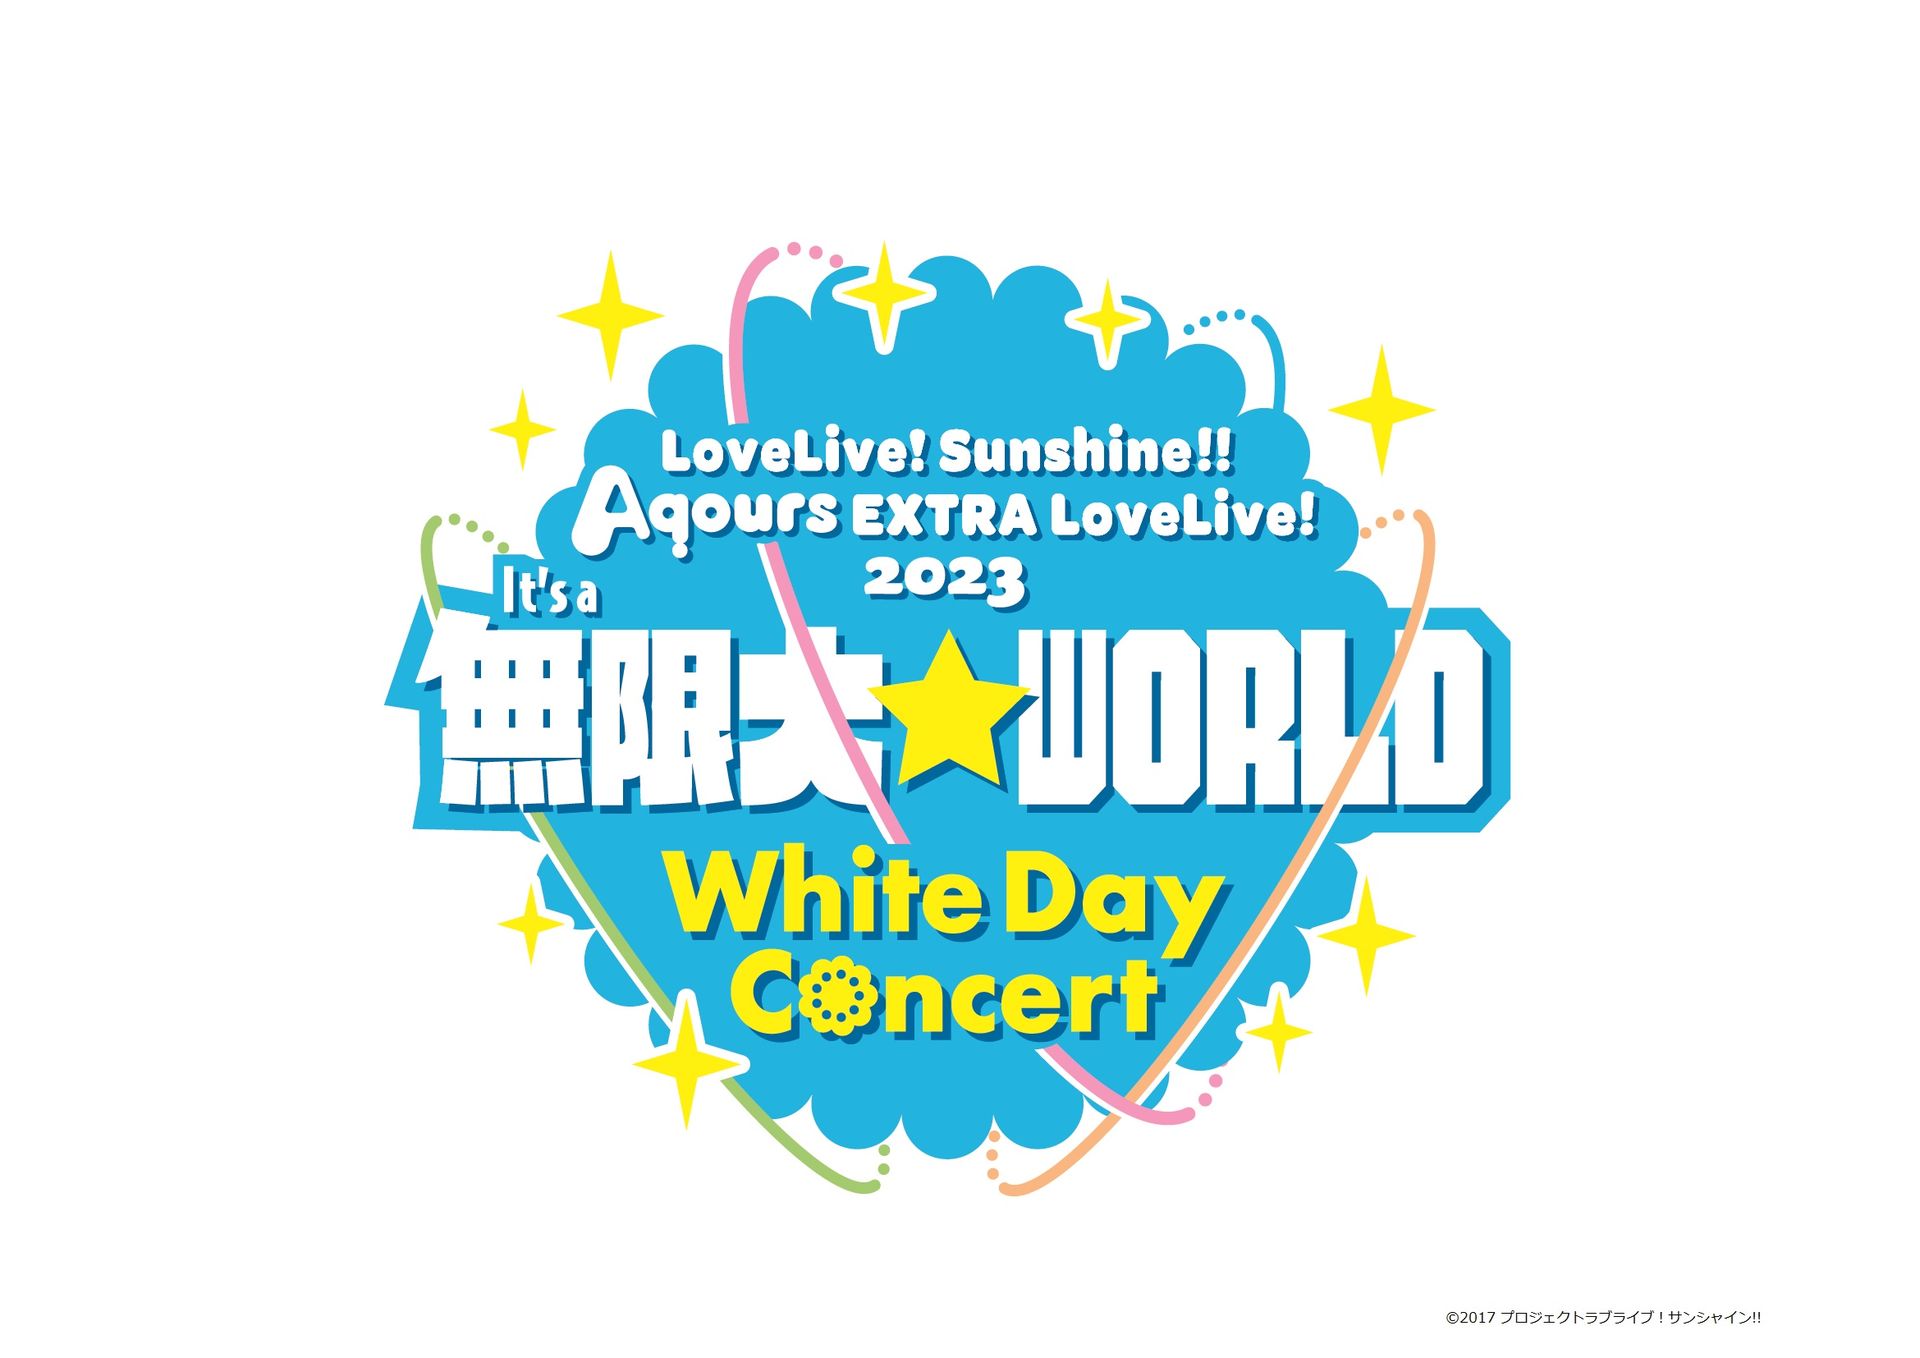 [Streaming+] Love Live! Sunshine!! Aqours EXTRA LoveLive! 2023 ～It’s a Mugendai☆WORLD～＜White Day Concert＞